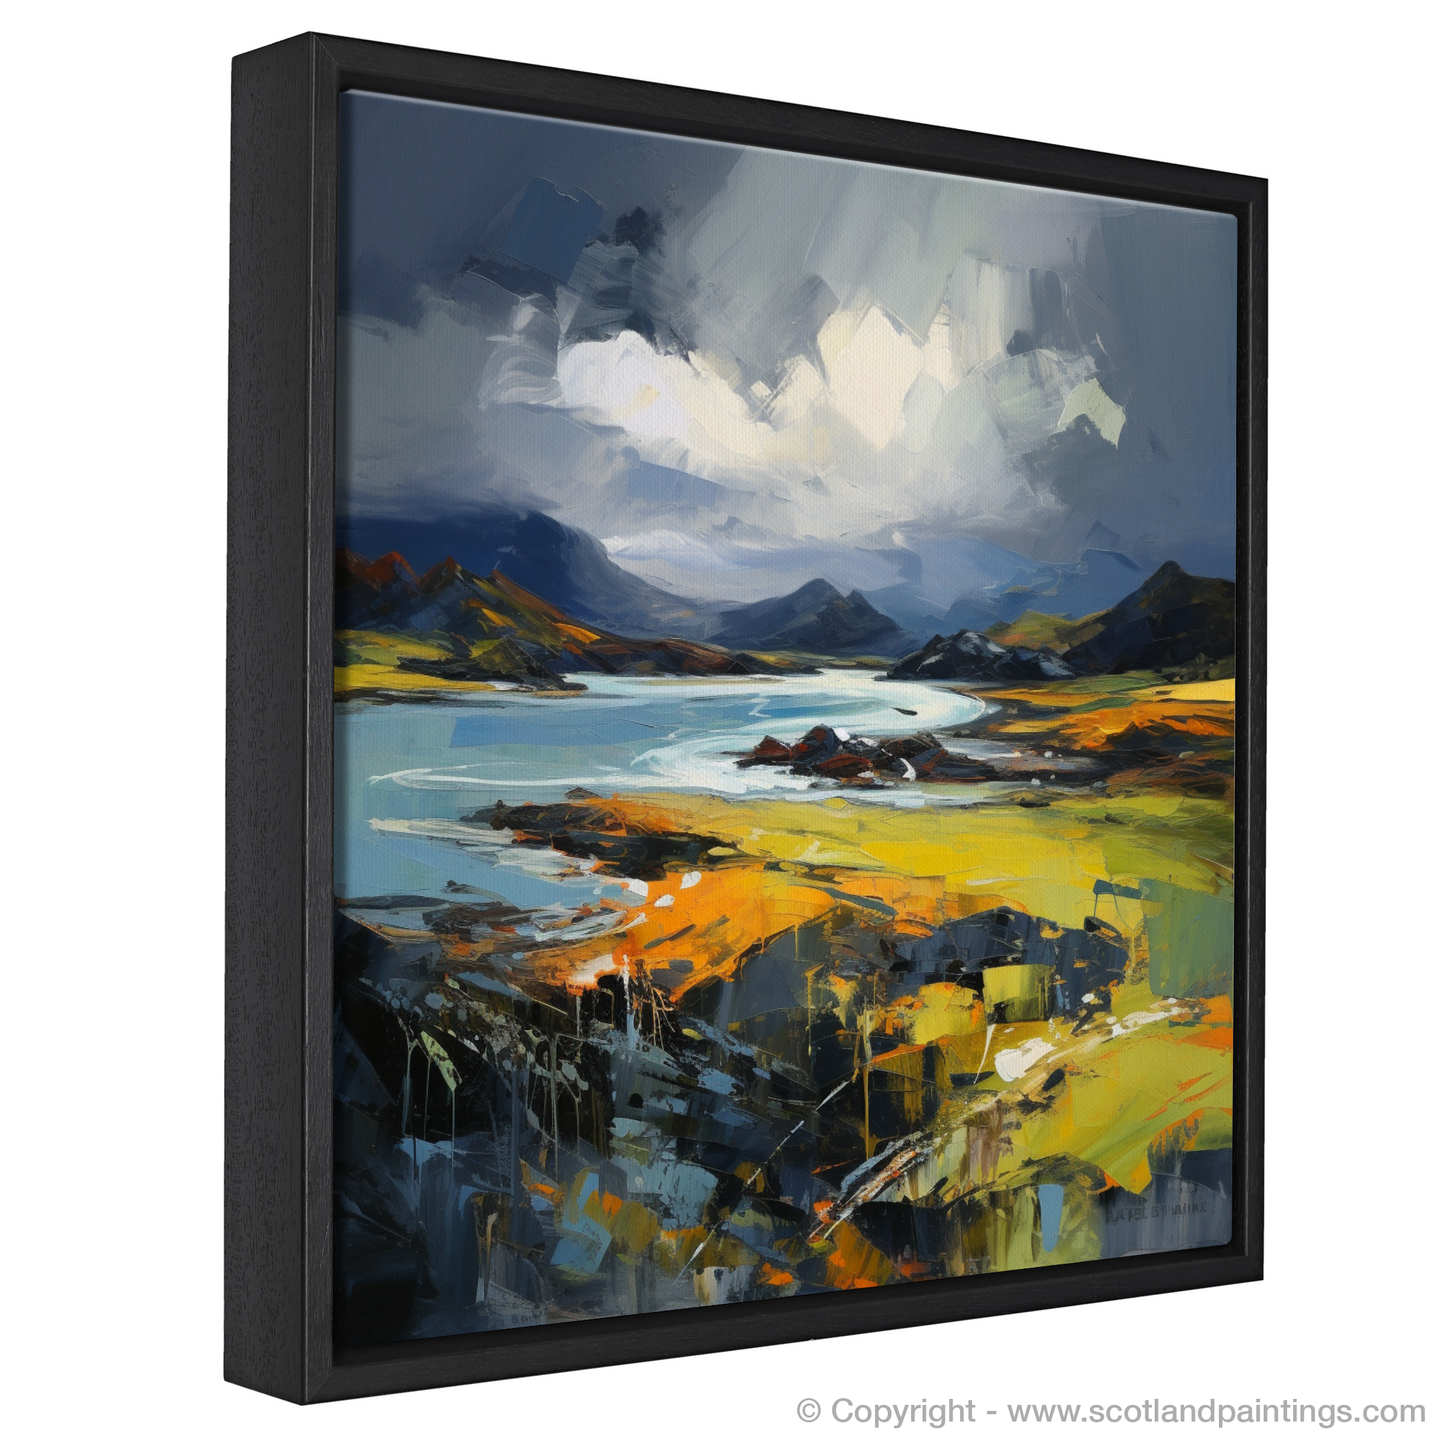 Painting and Art Print of Easdale Sound with a stormy sky entitled "Storm over Easdale Sound: An Expressionist Ode to Scottish Coves".